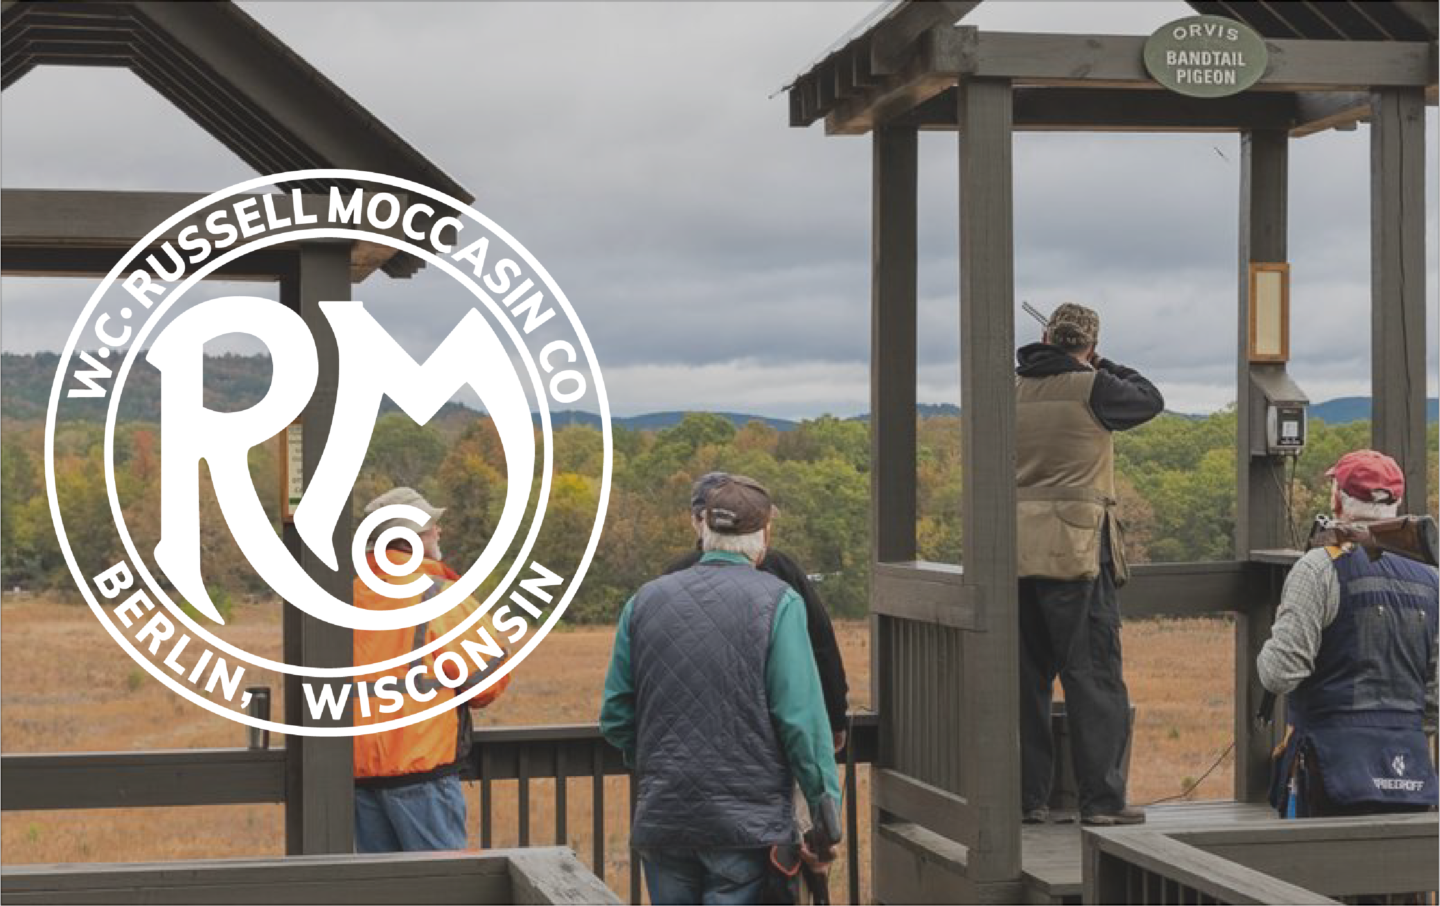 Get Some: The Russell Moccasin Sporting Clays Invitational on March 16th